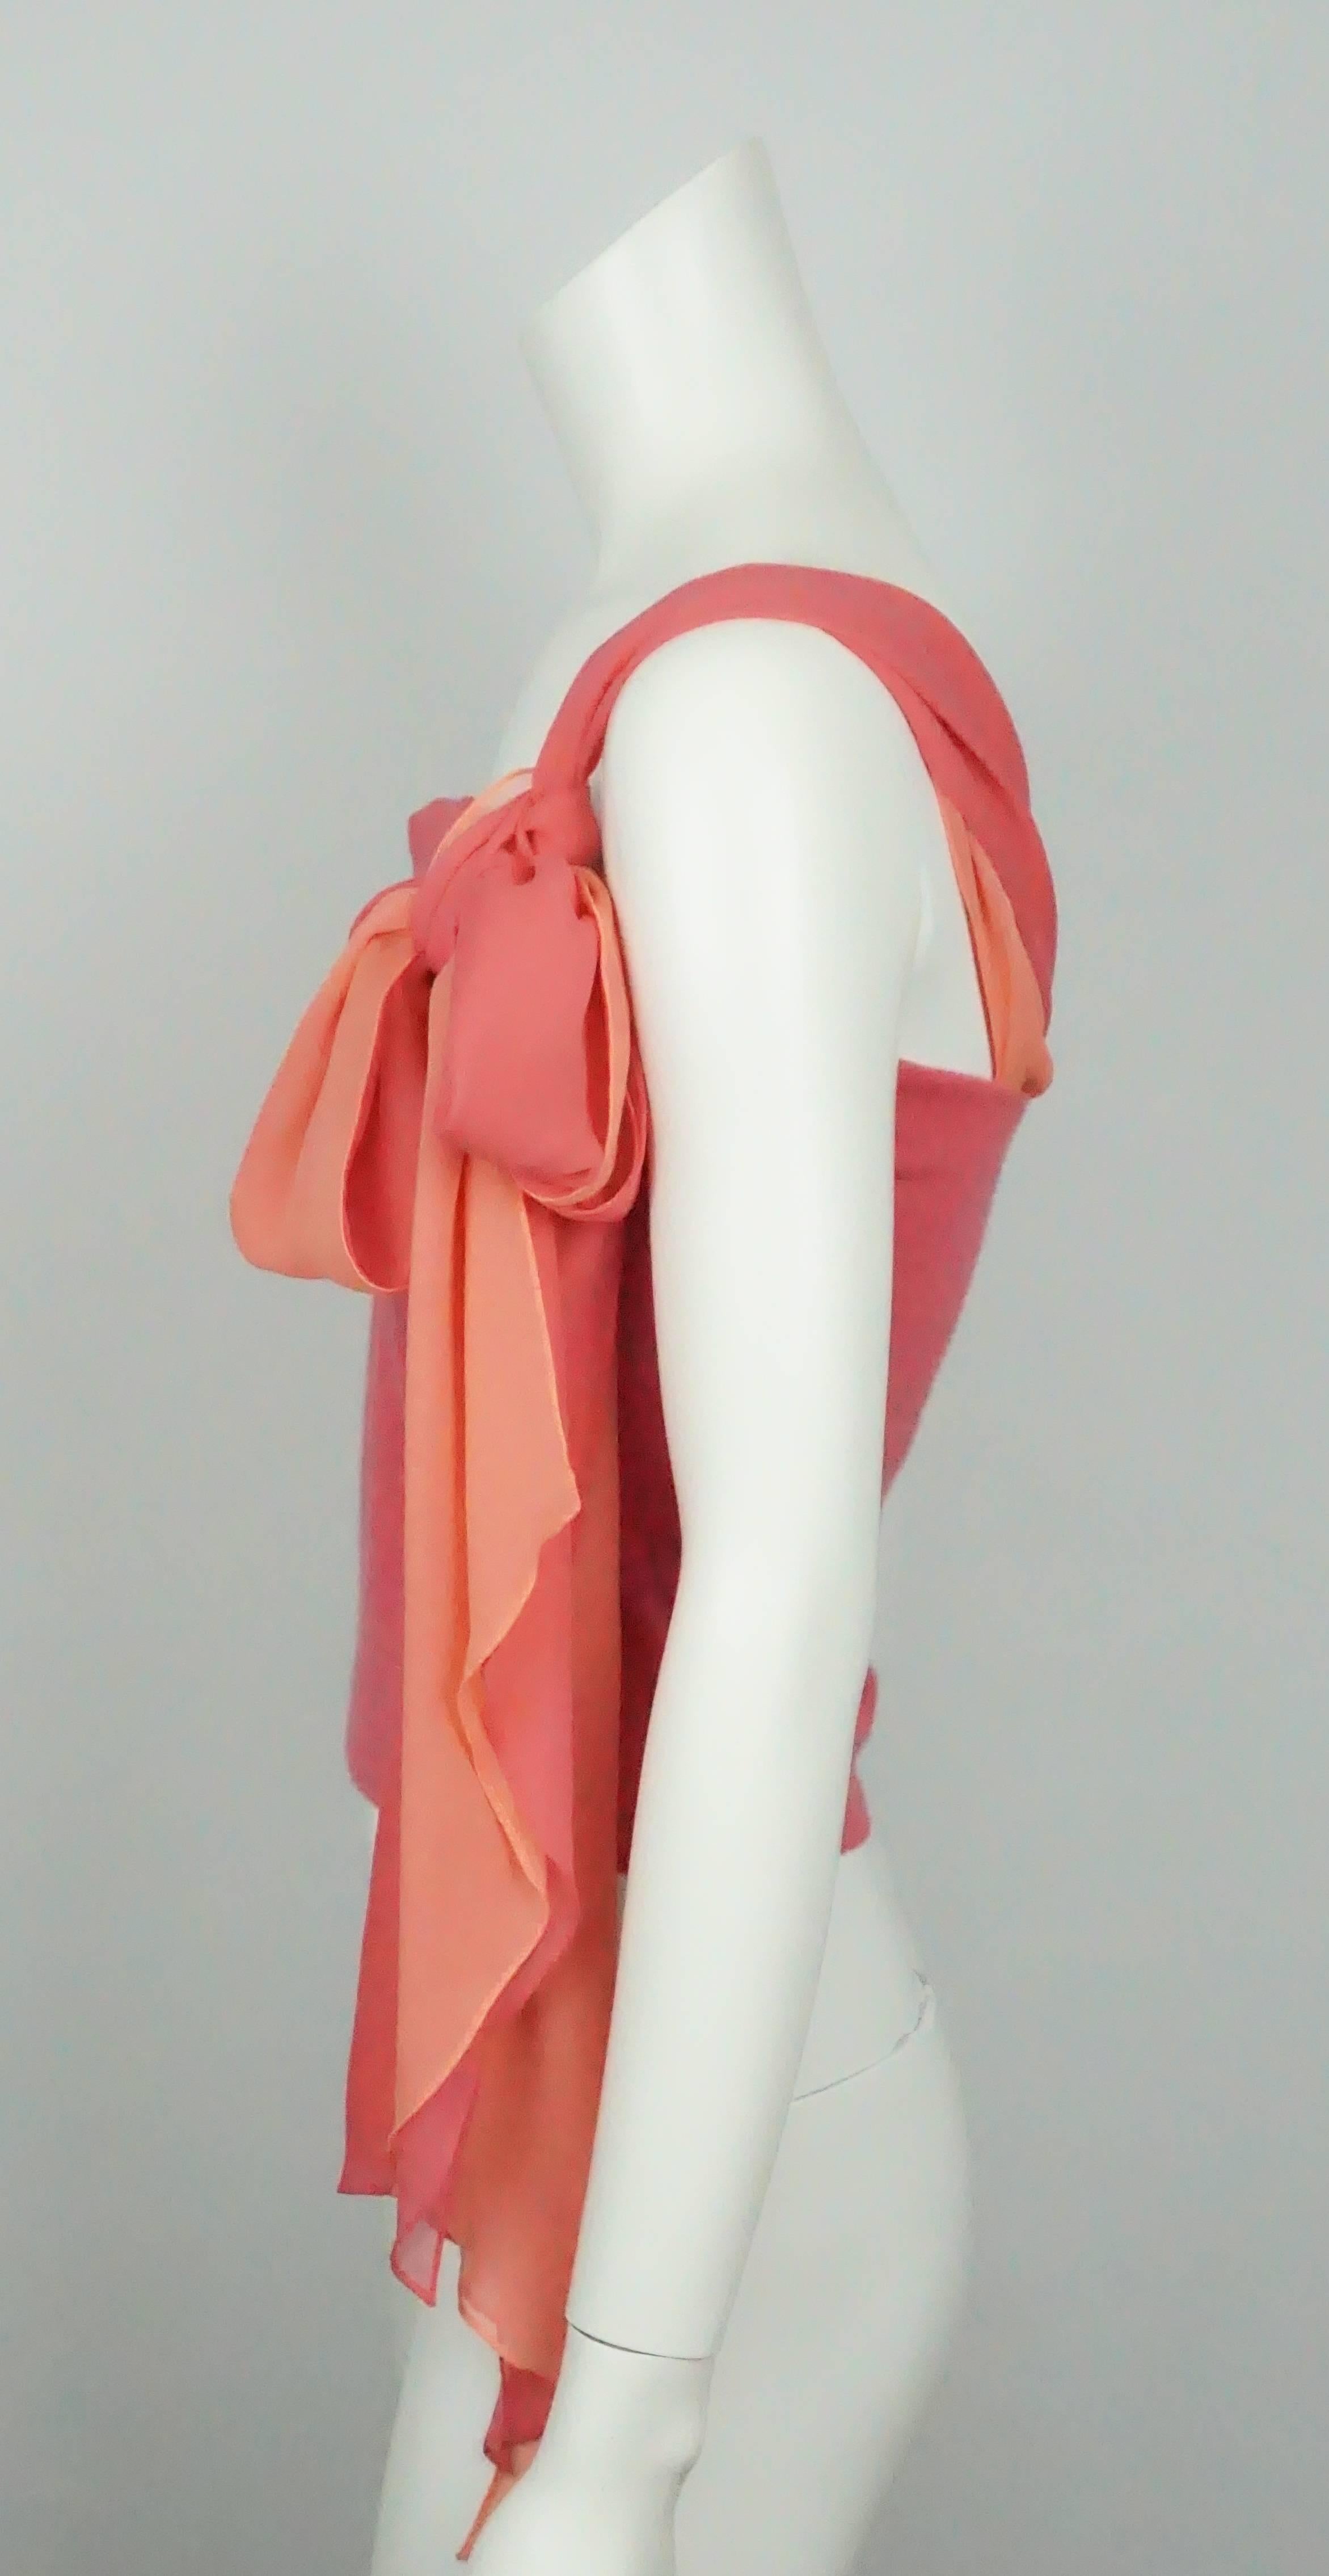 Ralph Lauren Black Label Coral Cashmere and Silk Tie Top - M  This top can be worn as a strapless as the torso portion of the top is made of a cashmere knit and has a built in band serving as support/bra like. It has a double layered 9 inch silk